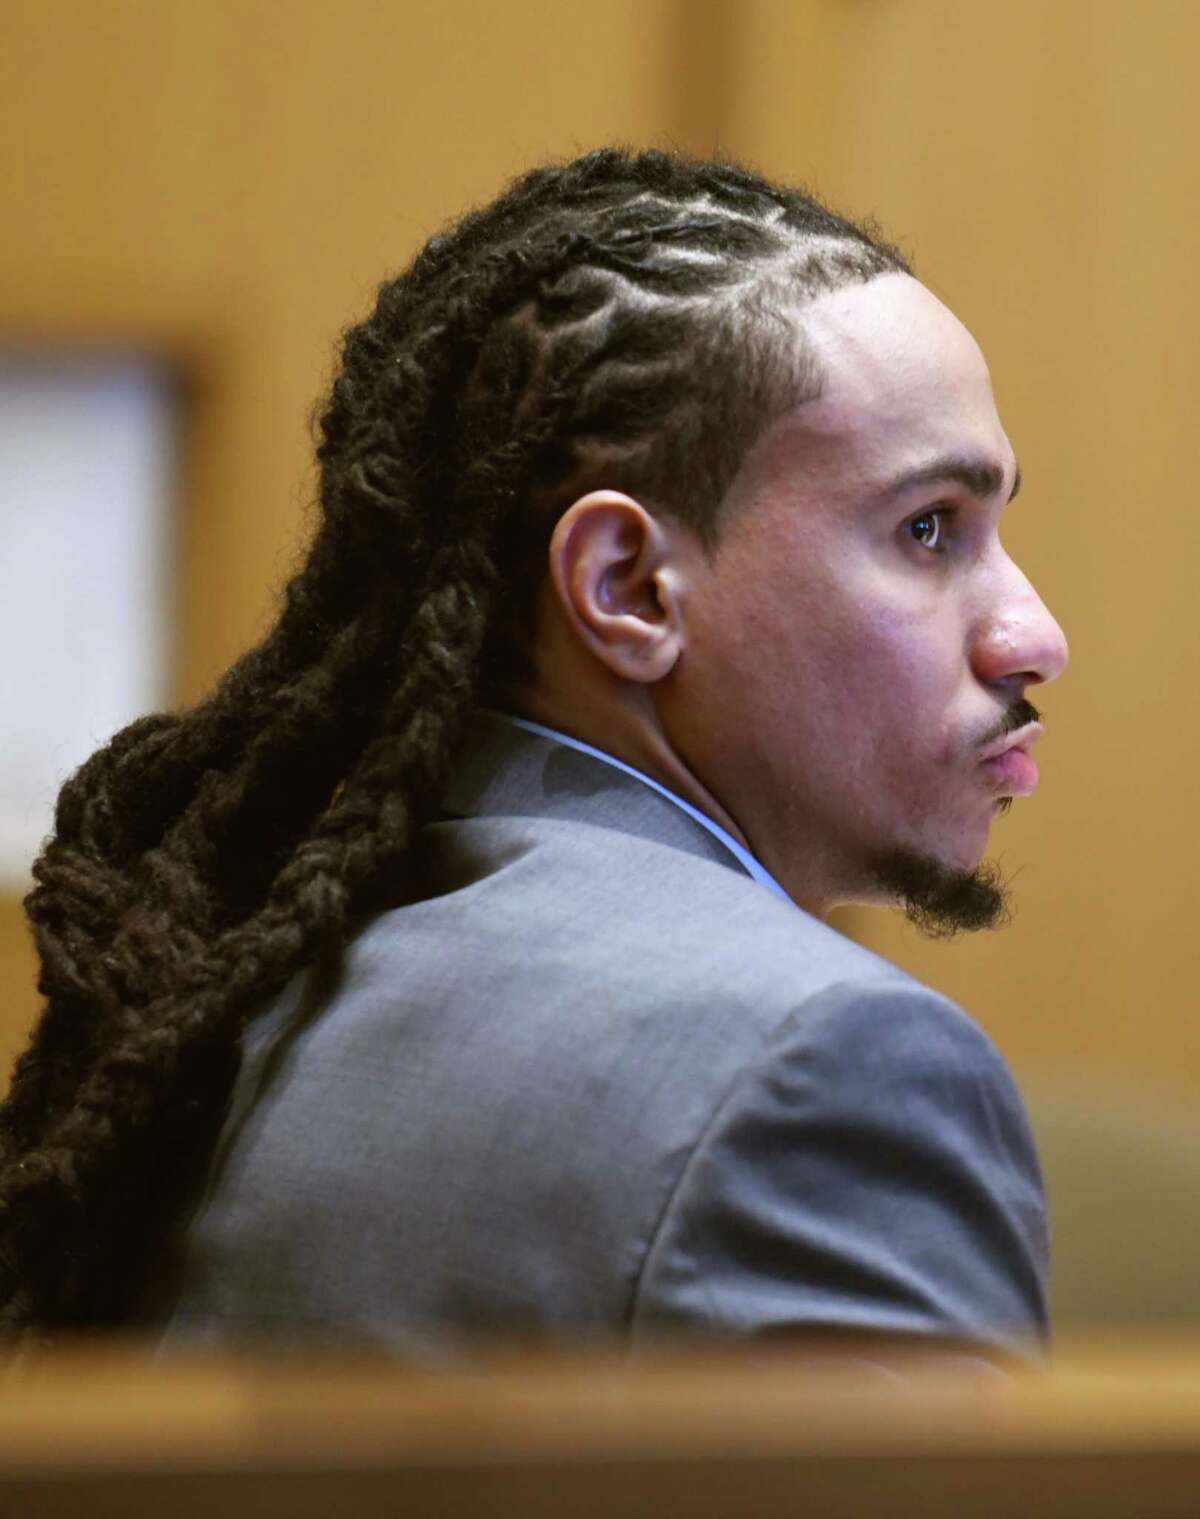 Jhonel Telemin-Valerio attends the first day of trial in a joint murder case at Connecticut Superior Court in Stamford, Conn. Monday, Nov. 1, 2021. Trial began Monday for Deshawn Hayes and Jhonel Telemin-Valerio, who are accused of fatally shooting Maxine Gooden, a 43-year-old mother of five, in 2015.